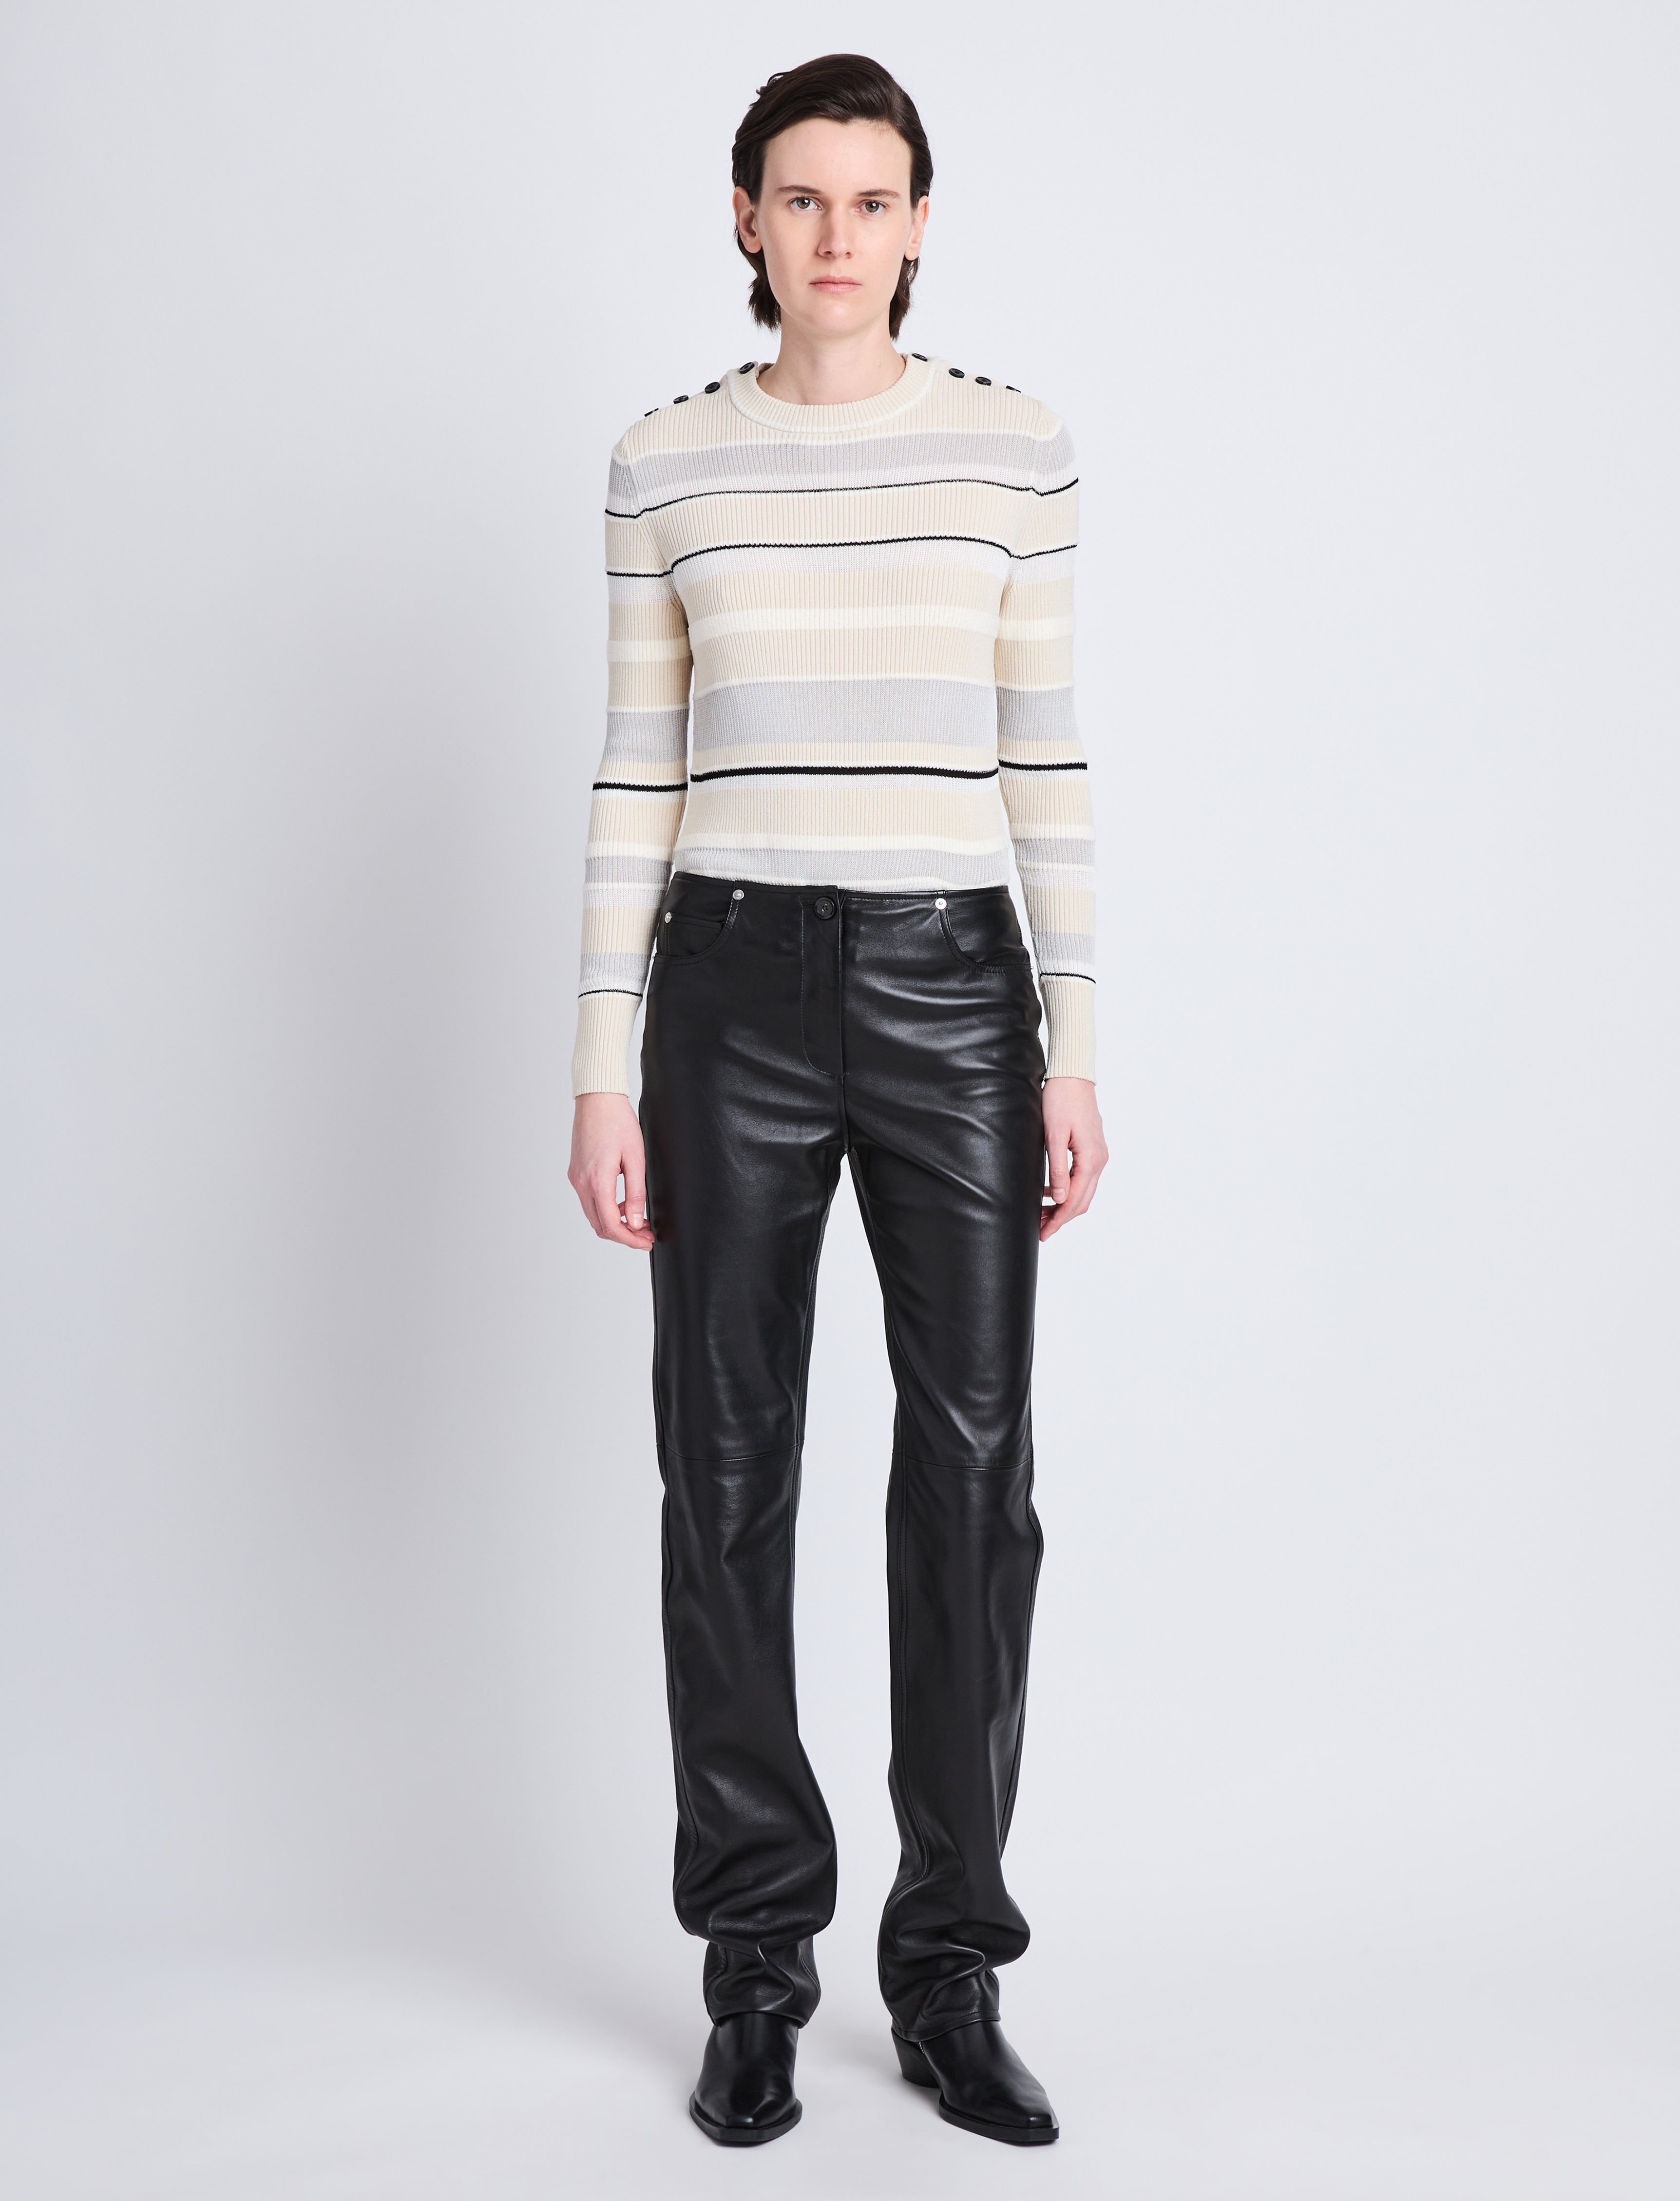 Judy Sweater in Textured Striped Knit - 3